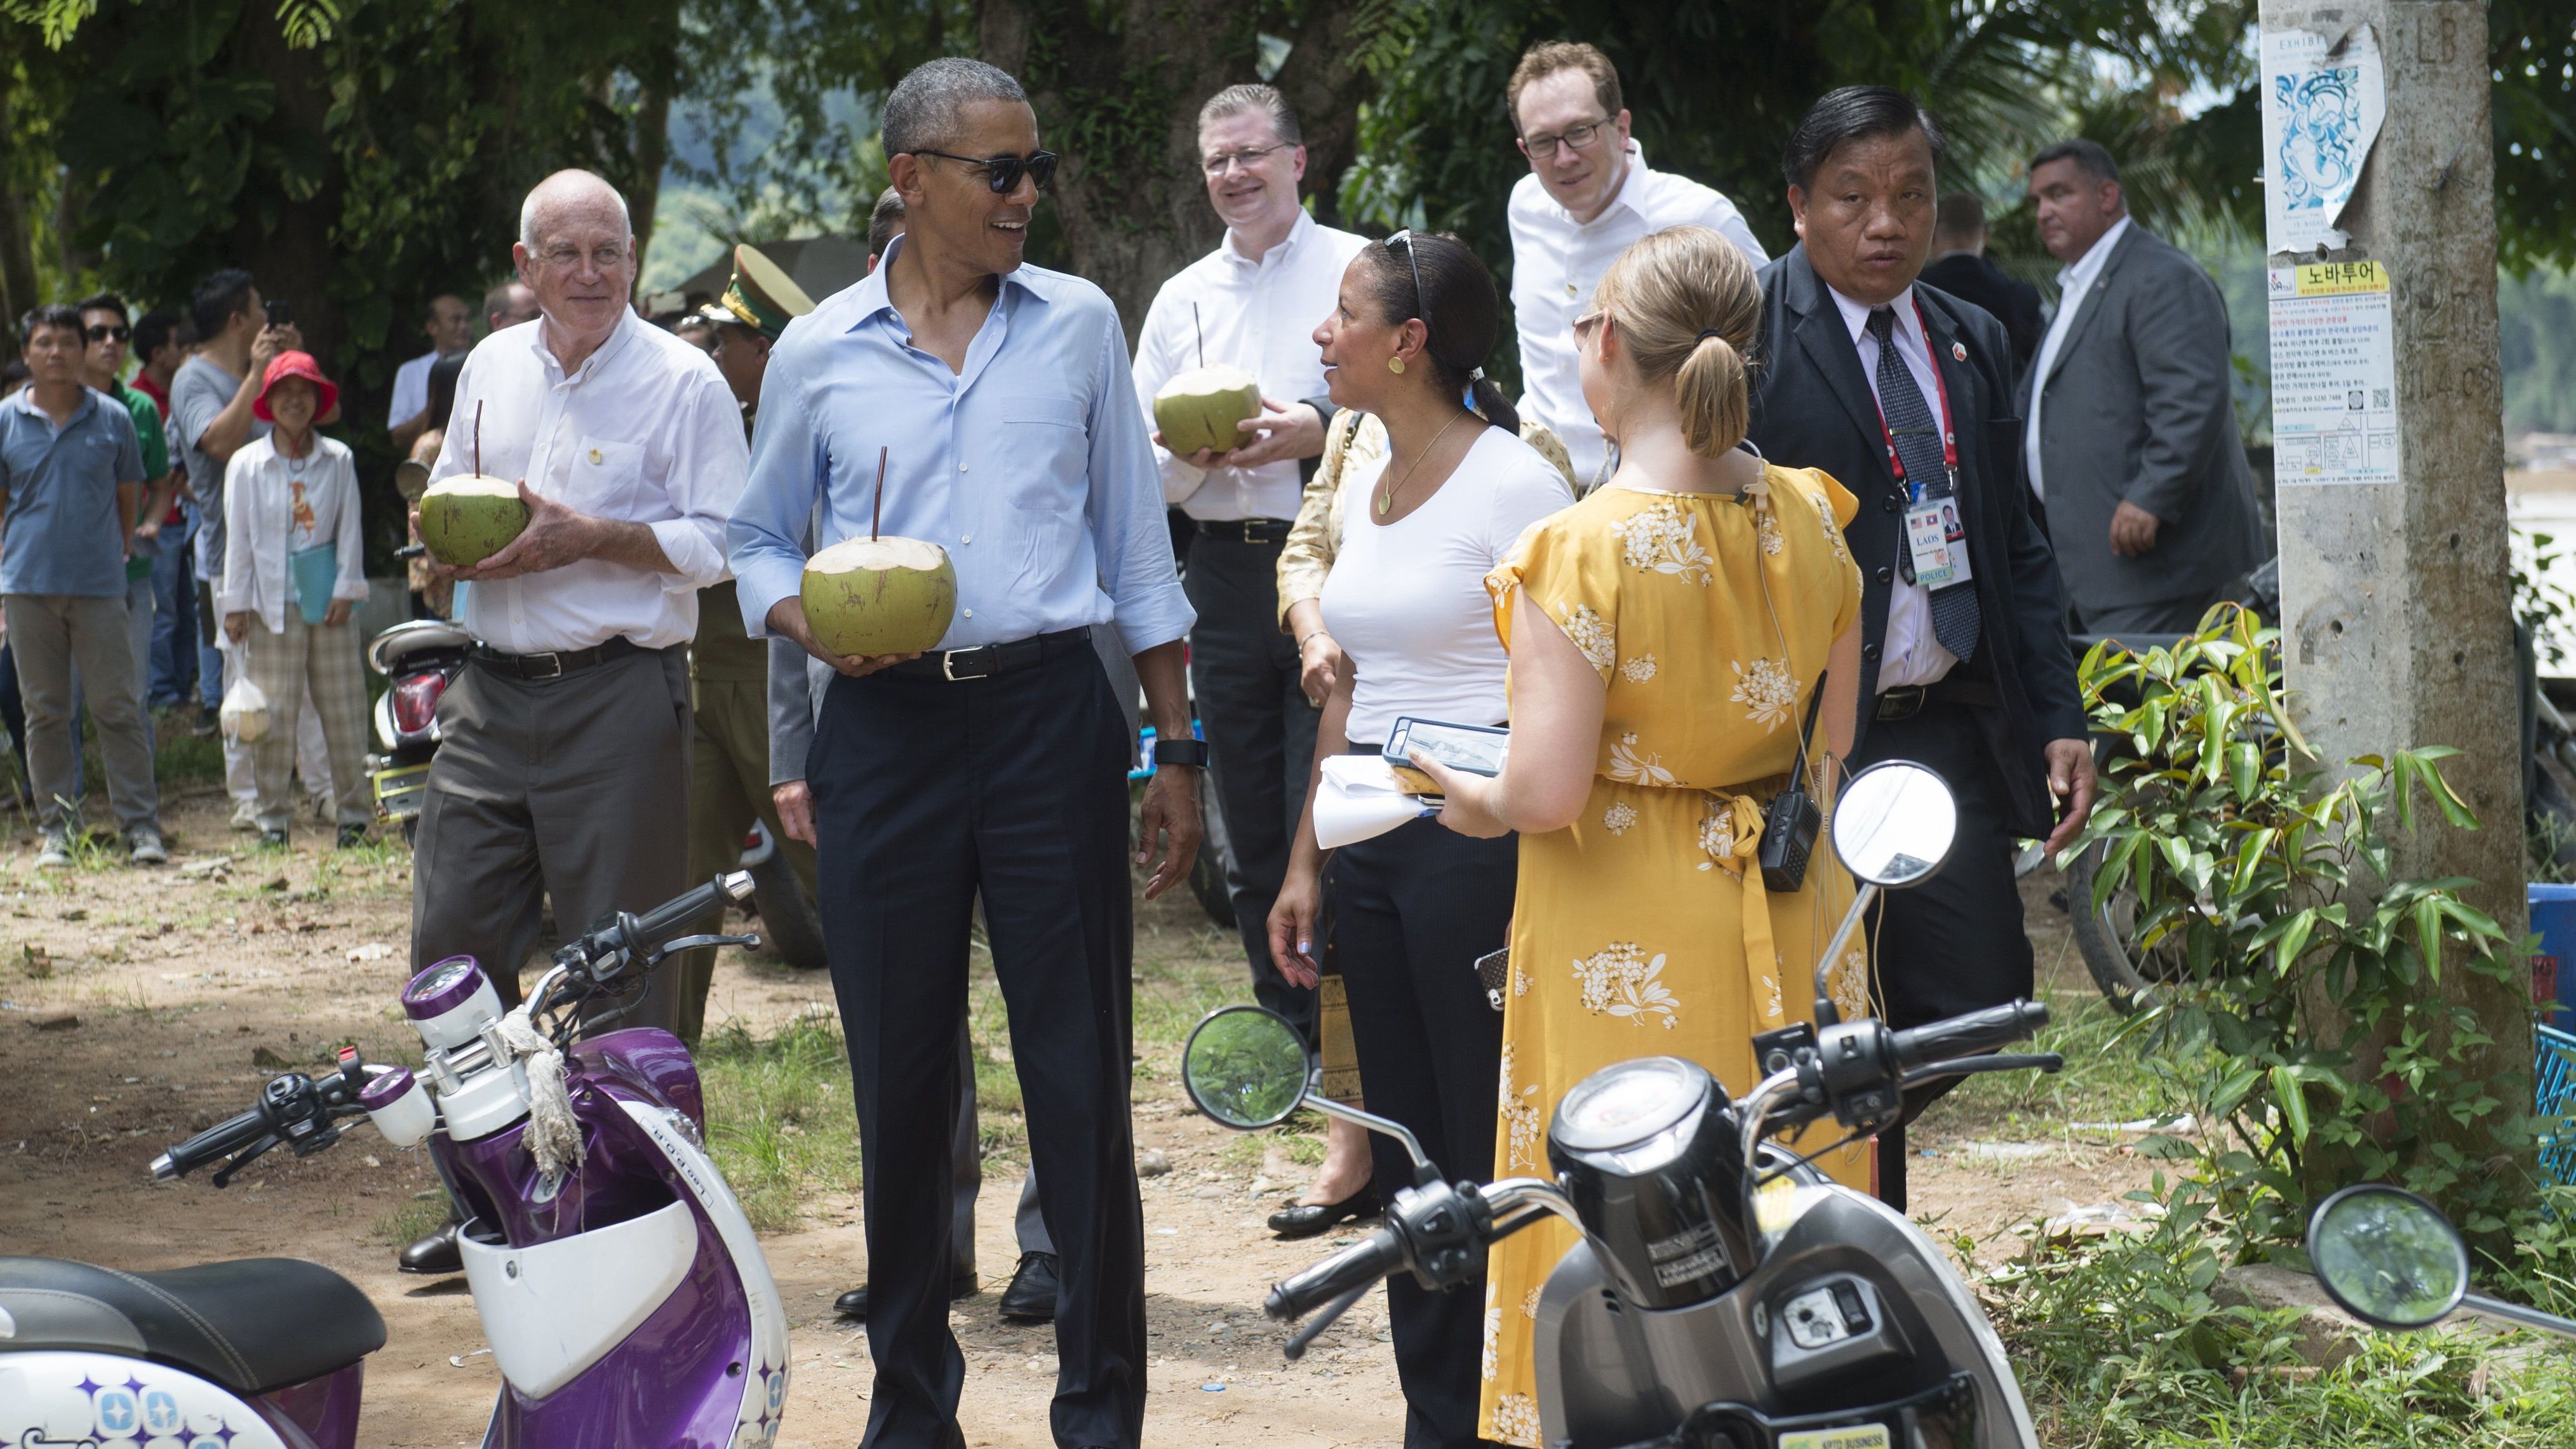 US President Barack Obama drinks from a coconut (2nd L) with US Ambassador to Laos Daniel Clune (L) as he makes a surprise stop for a drink alongside the Mekong River in Luang Prabang on September 7, 2016.